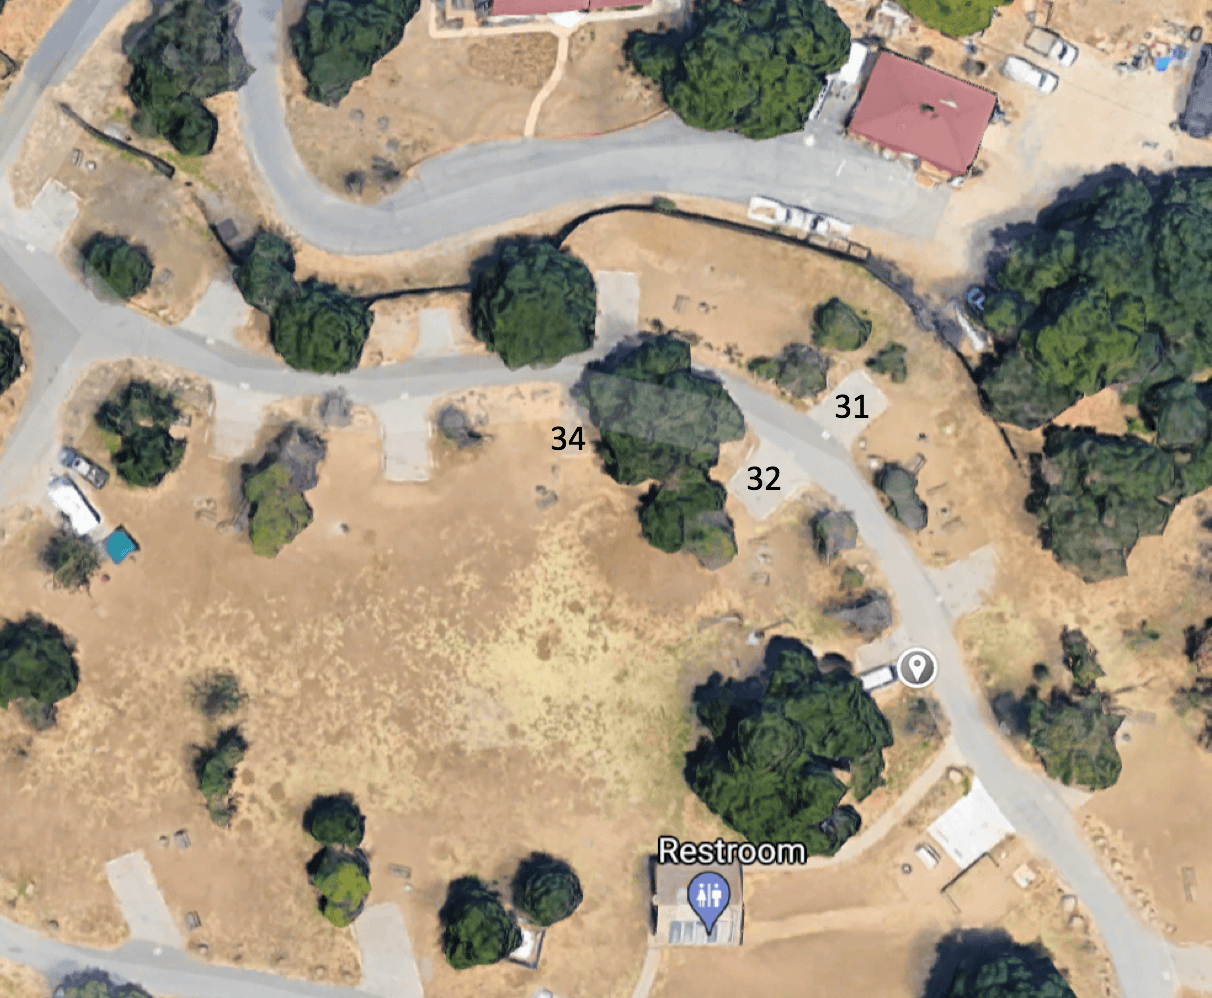 Malibu Creek State Park - Locations of campsites 31, 32 and 34.